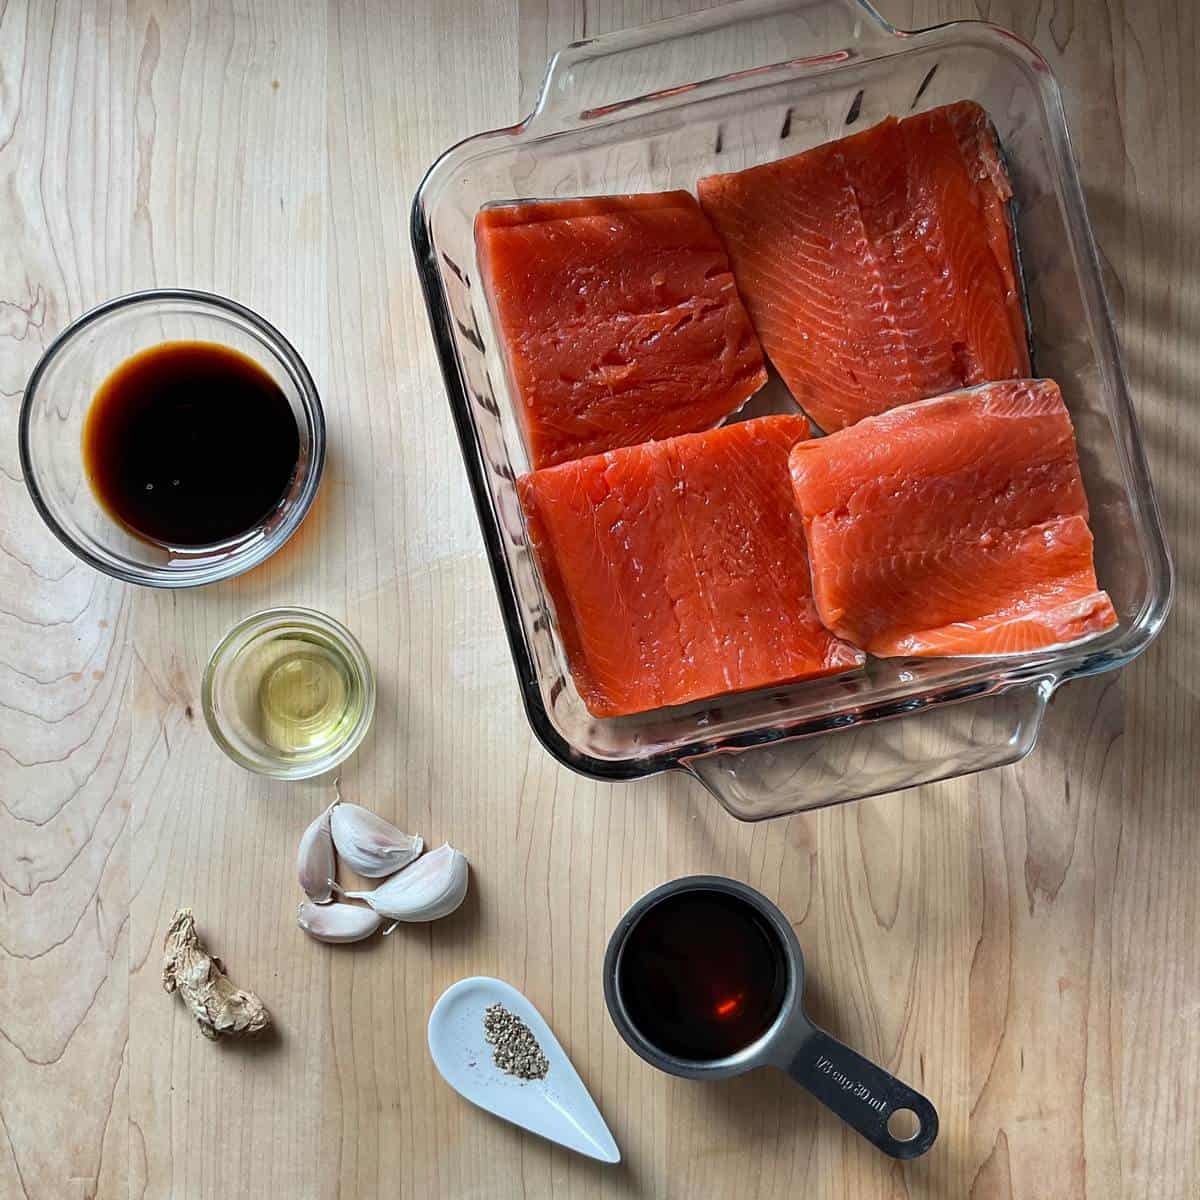 Ingredients to make a maple glazed salmon on a wooden table.